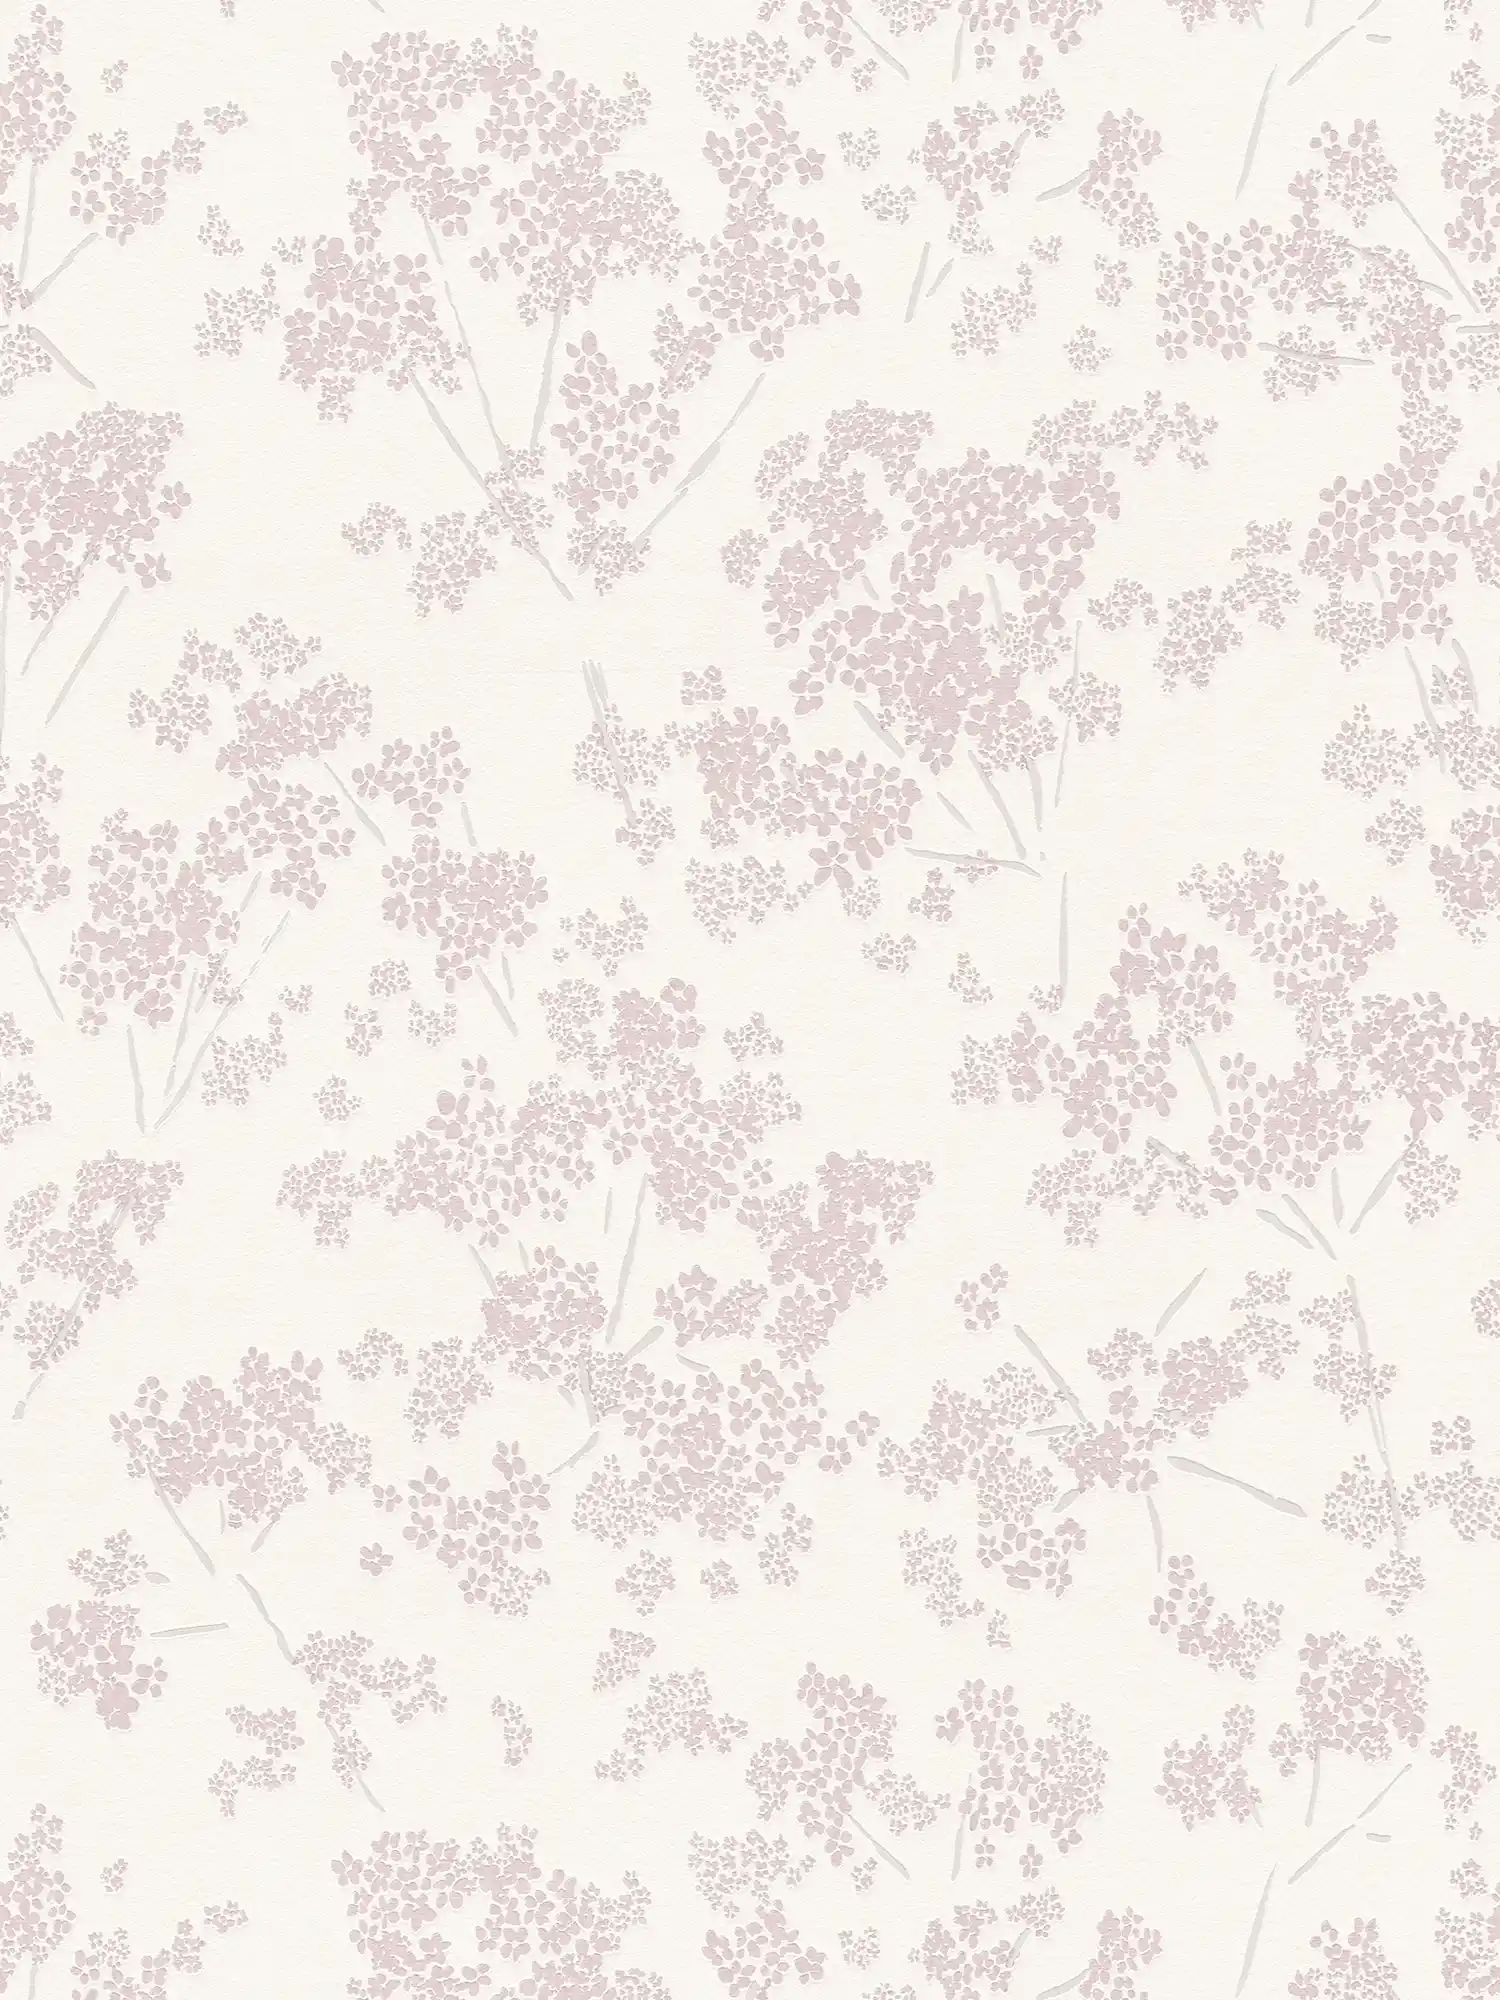 Floral non-woven wallpaper with a playful floral pattern - white, pink
